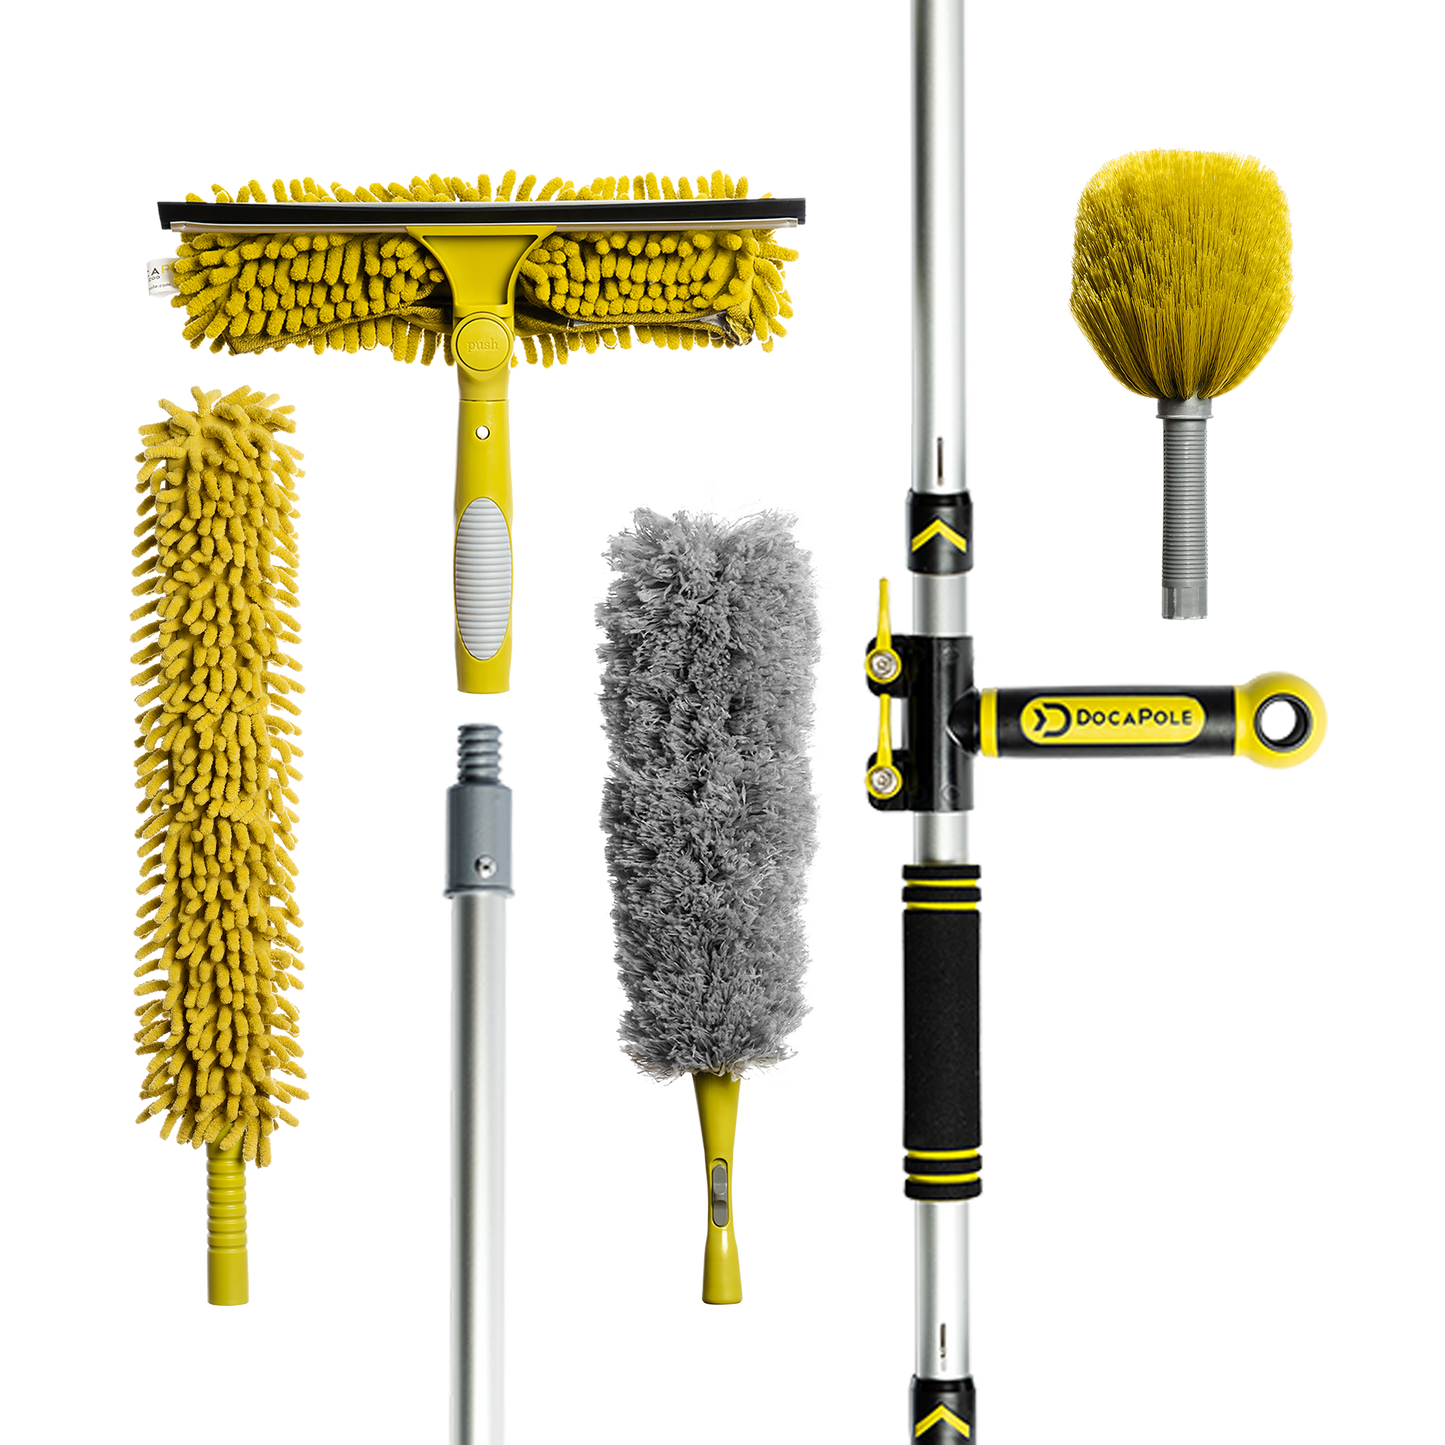 DocaGrip 4-piece cleaning kit